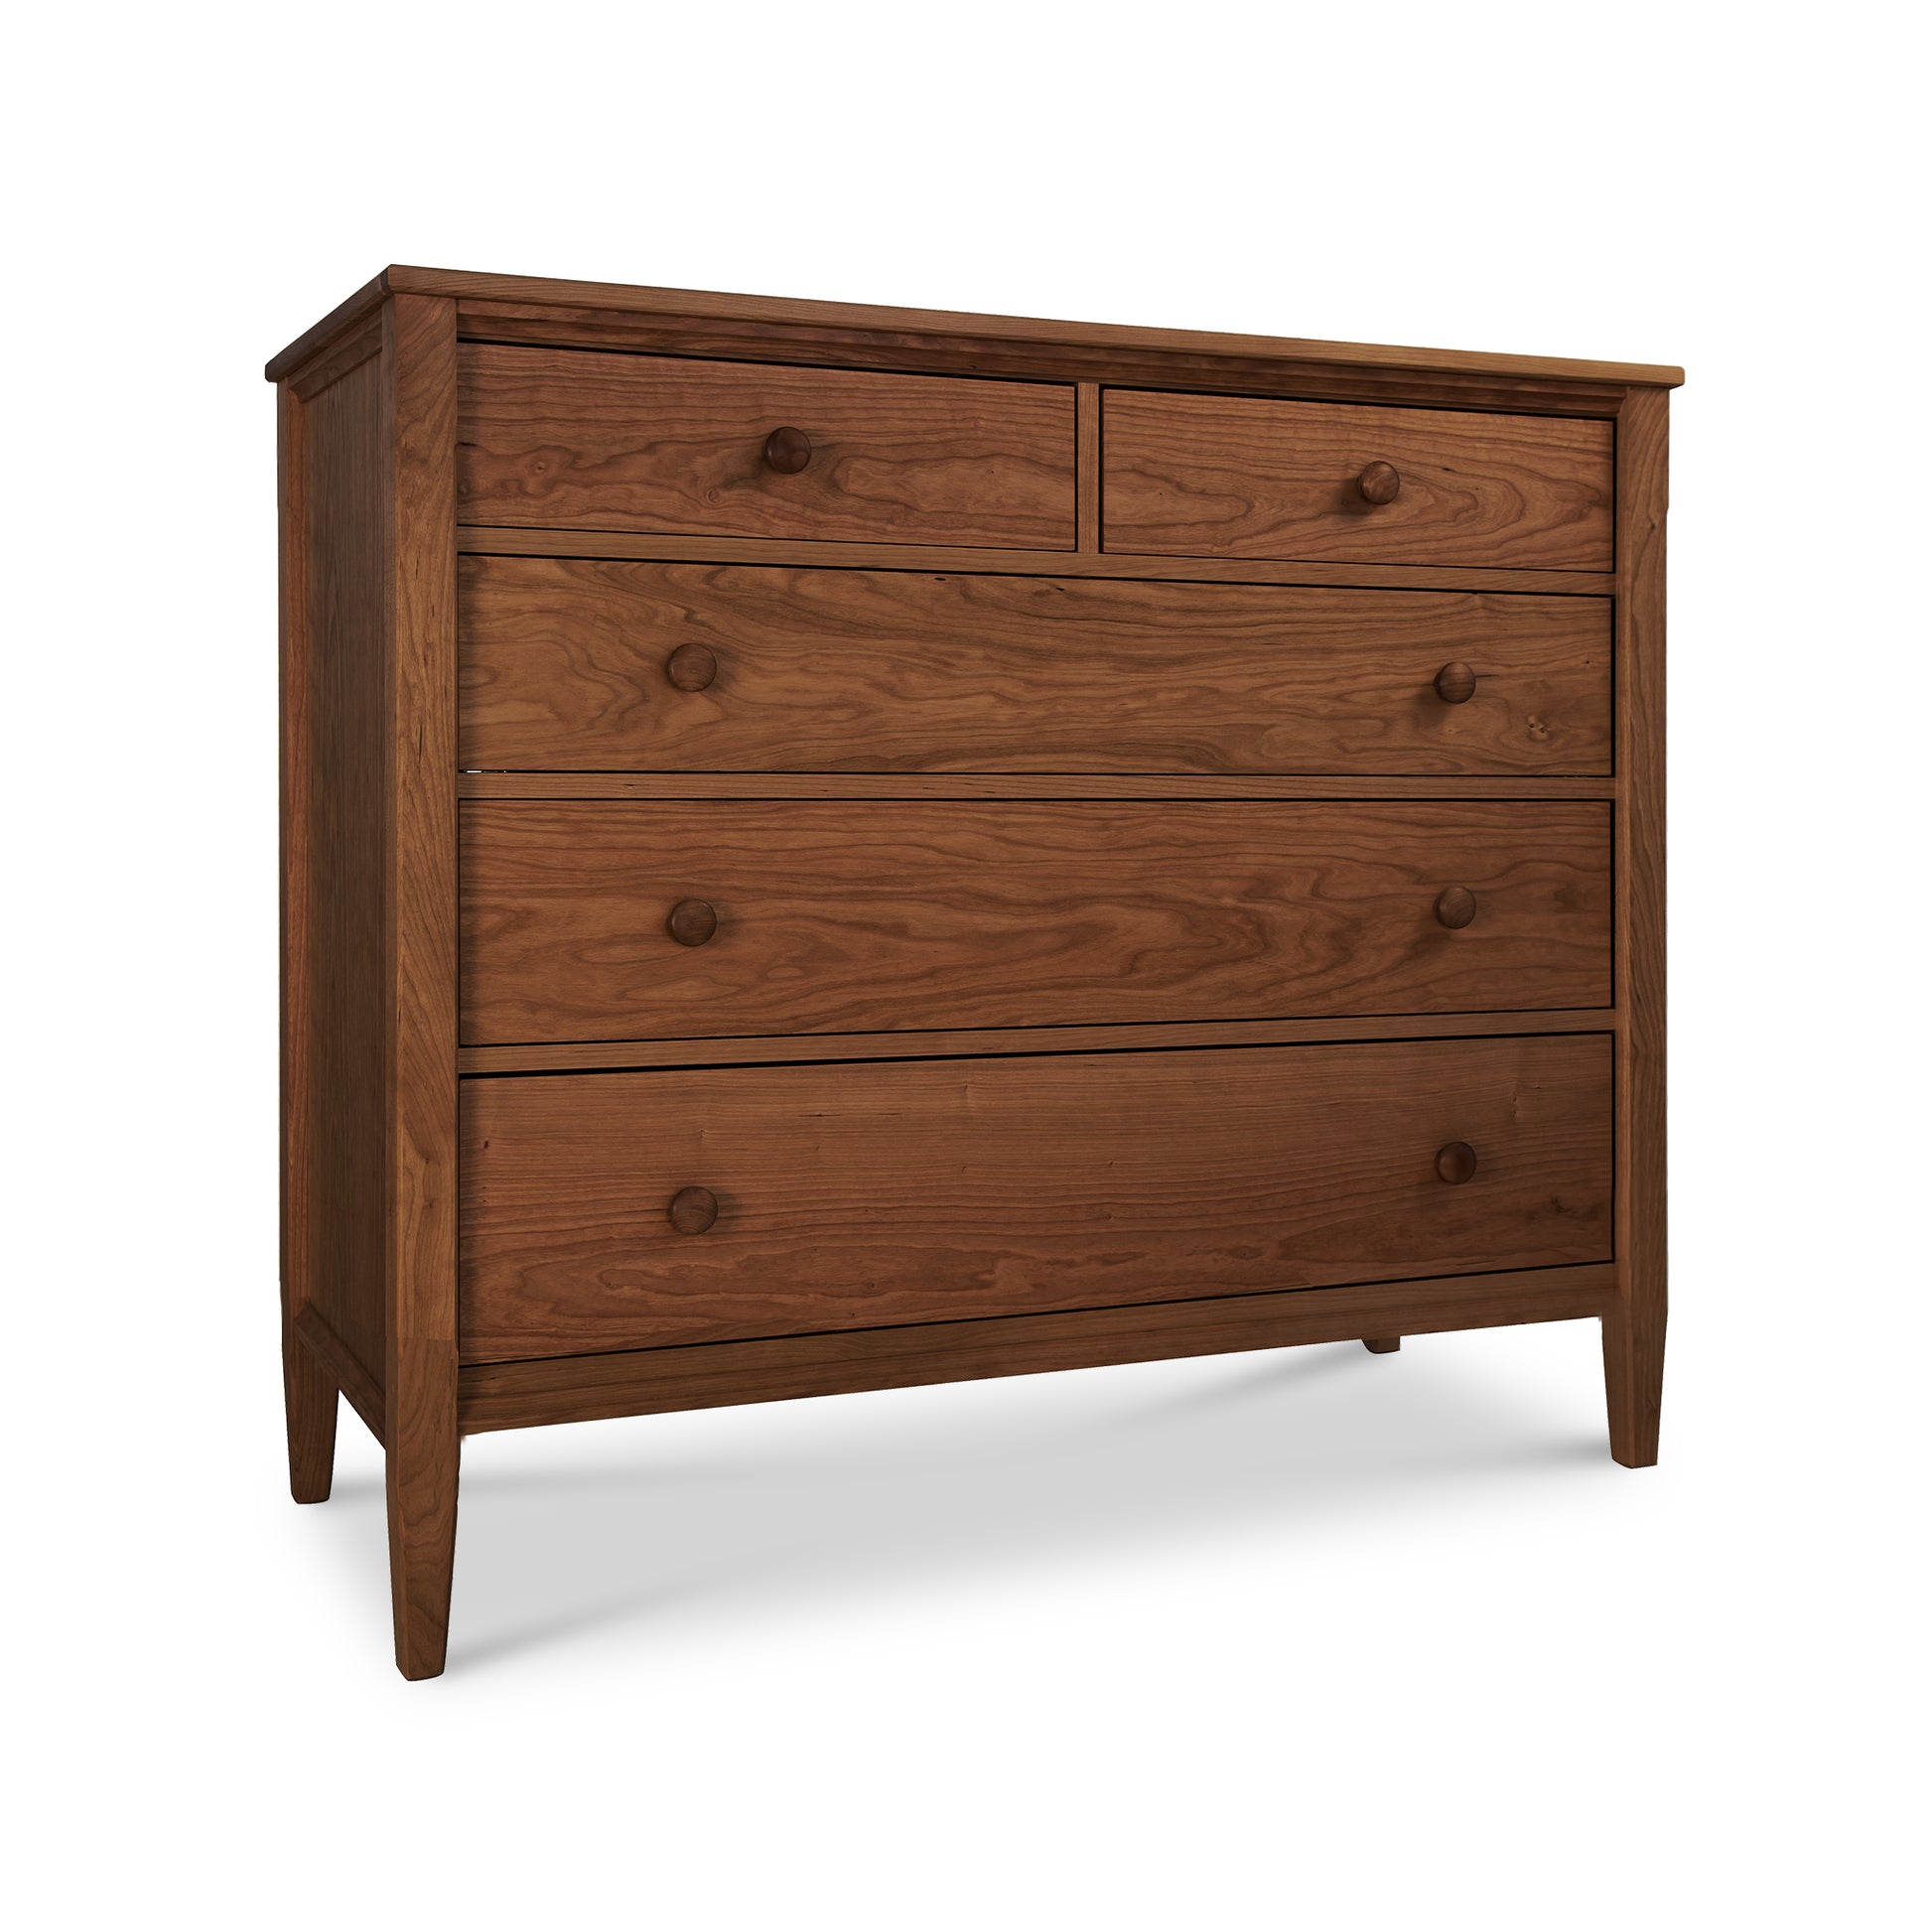 An Vermont Shaker Extra Wide Chest from Maple Corner Woodworks on a white background.